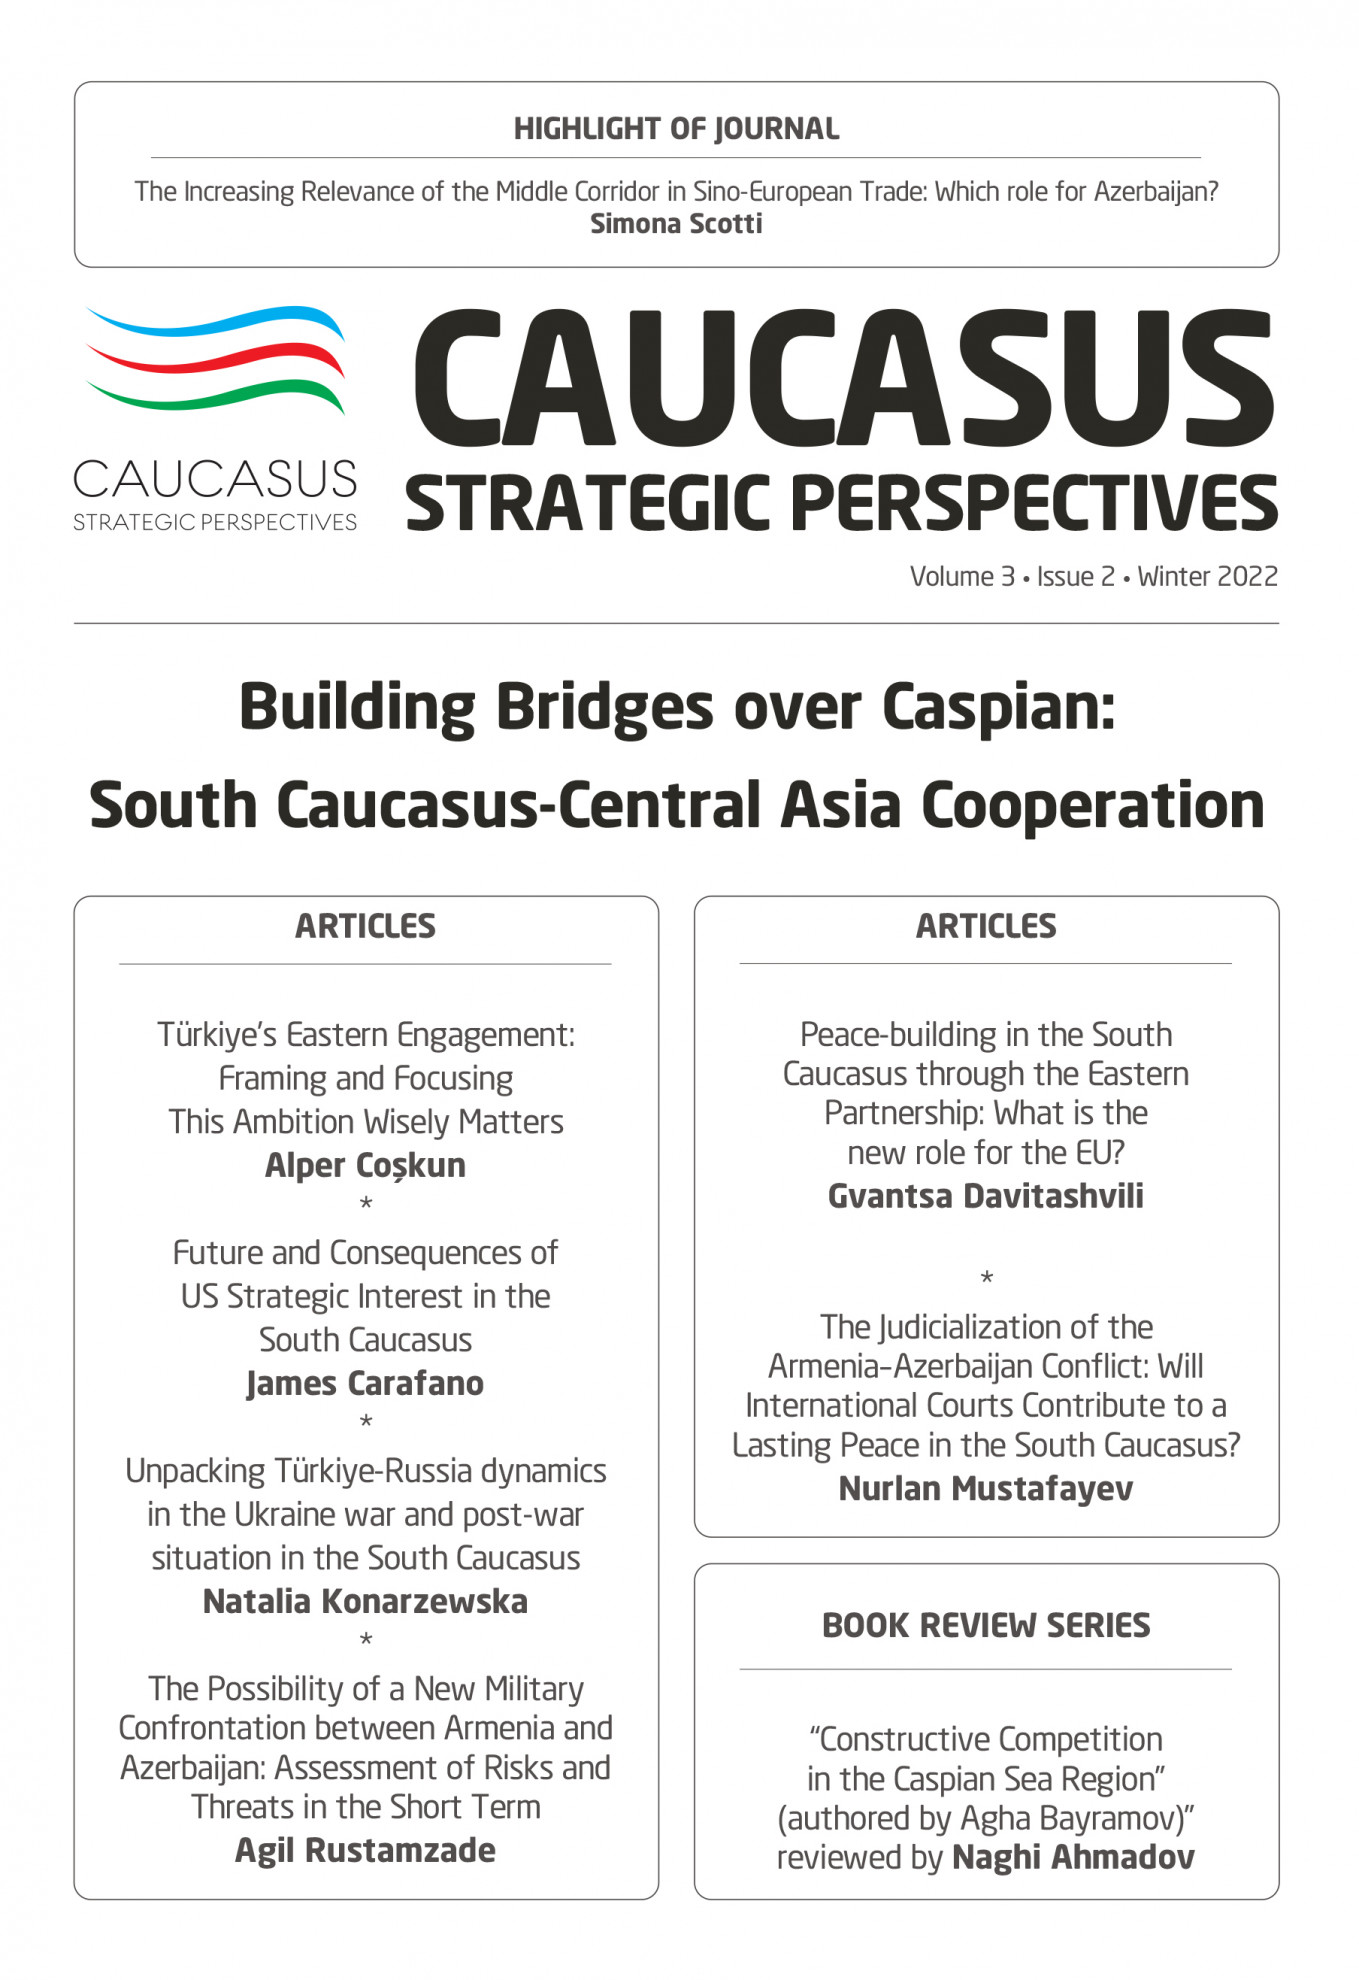 A new issue of the Caucasus Strategic Perspectives (CSP) journal has been released